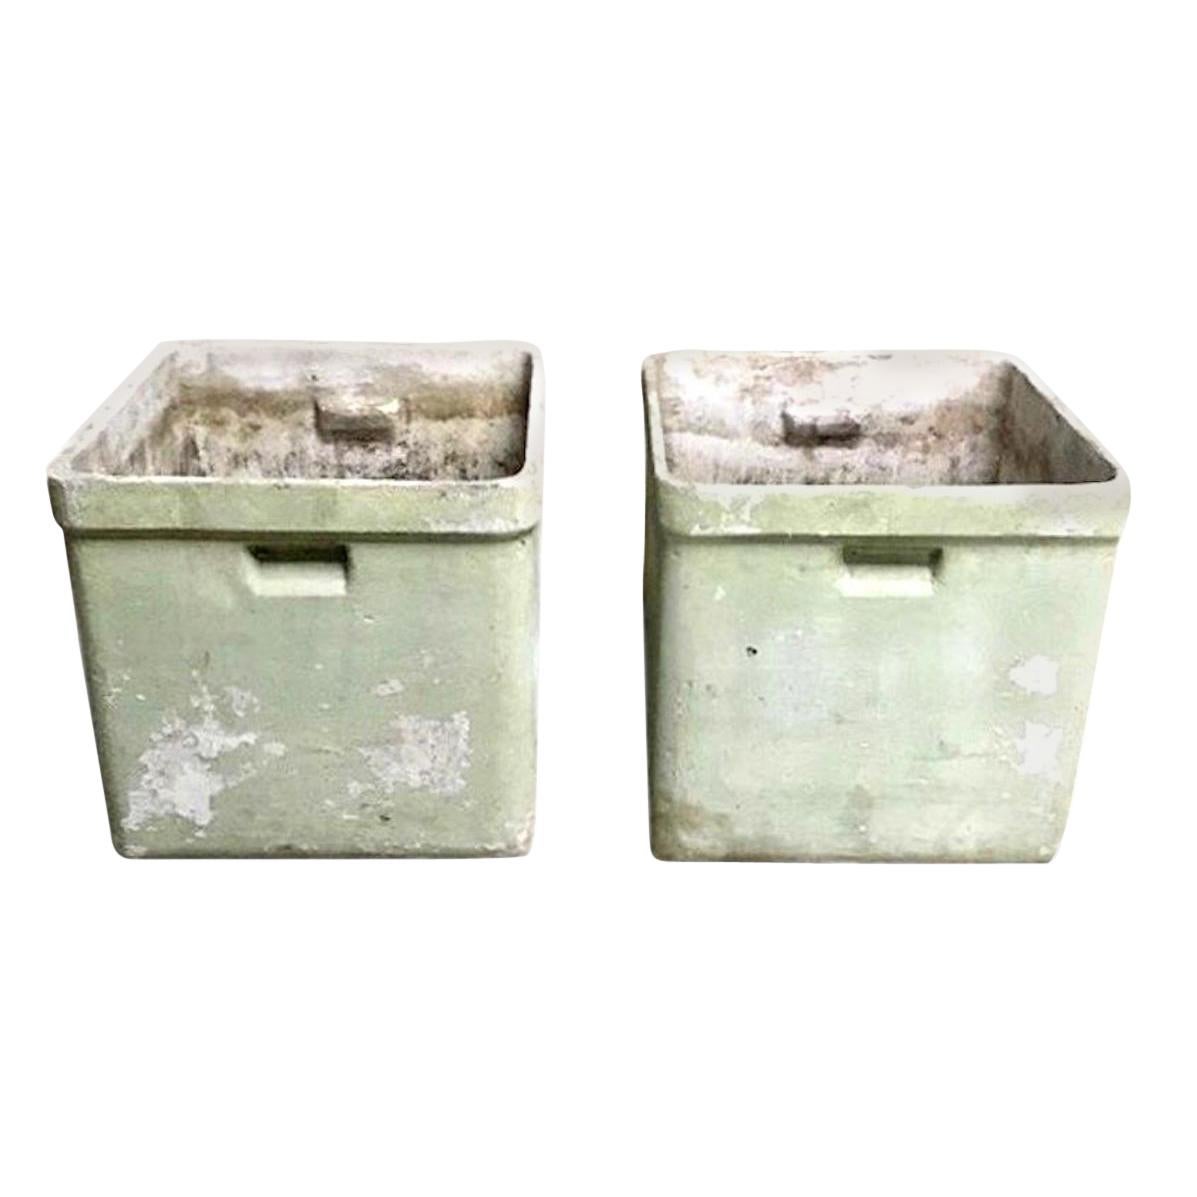 Great pair of box planters by Willy Guhl for Eternit. Great design. Green coloring and patina. Perfect scale. Two available. Priced individually. 



 